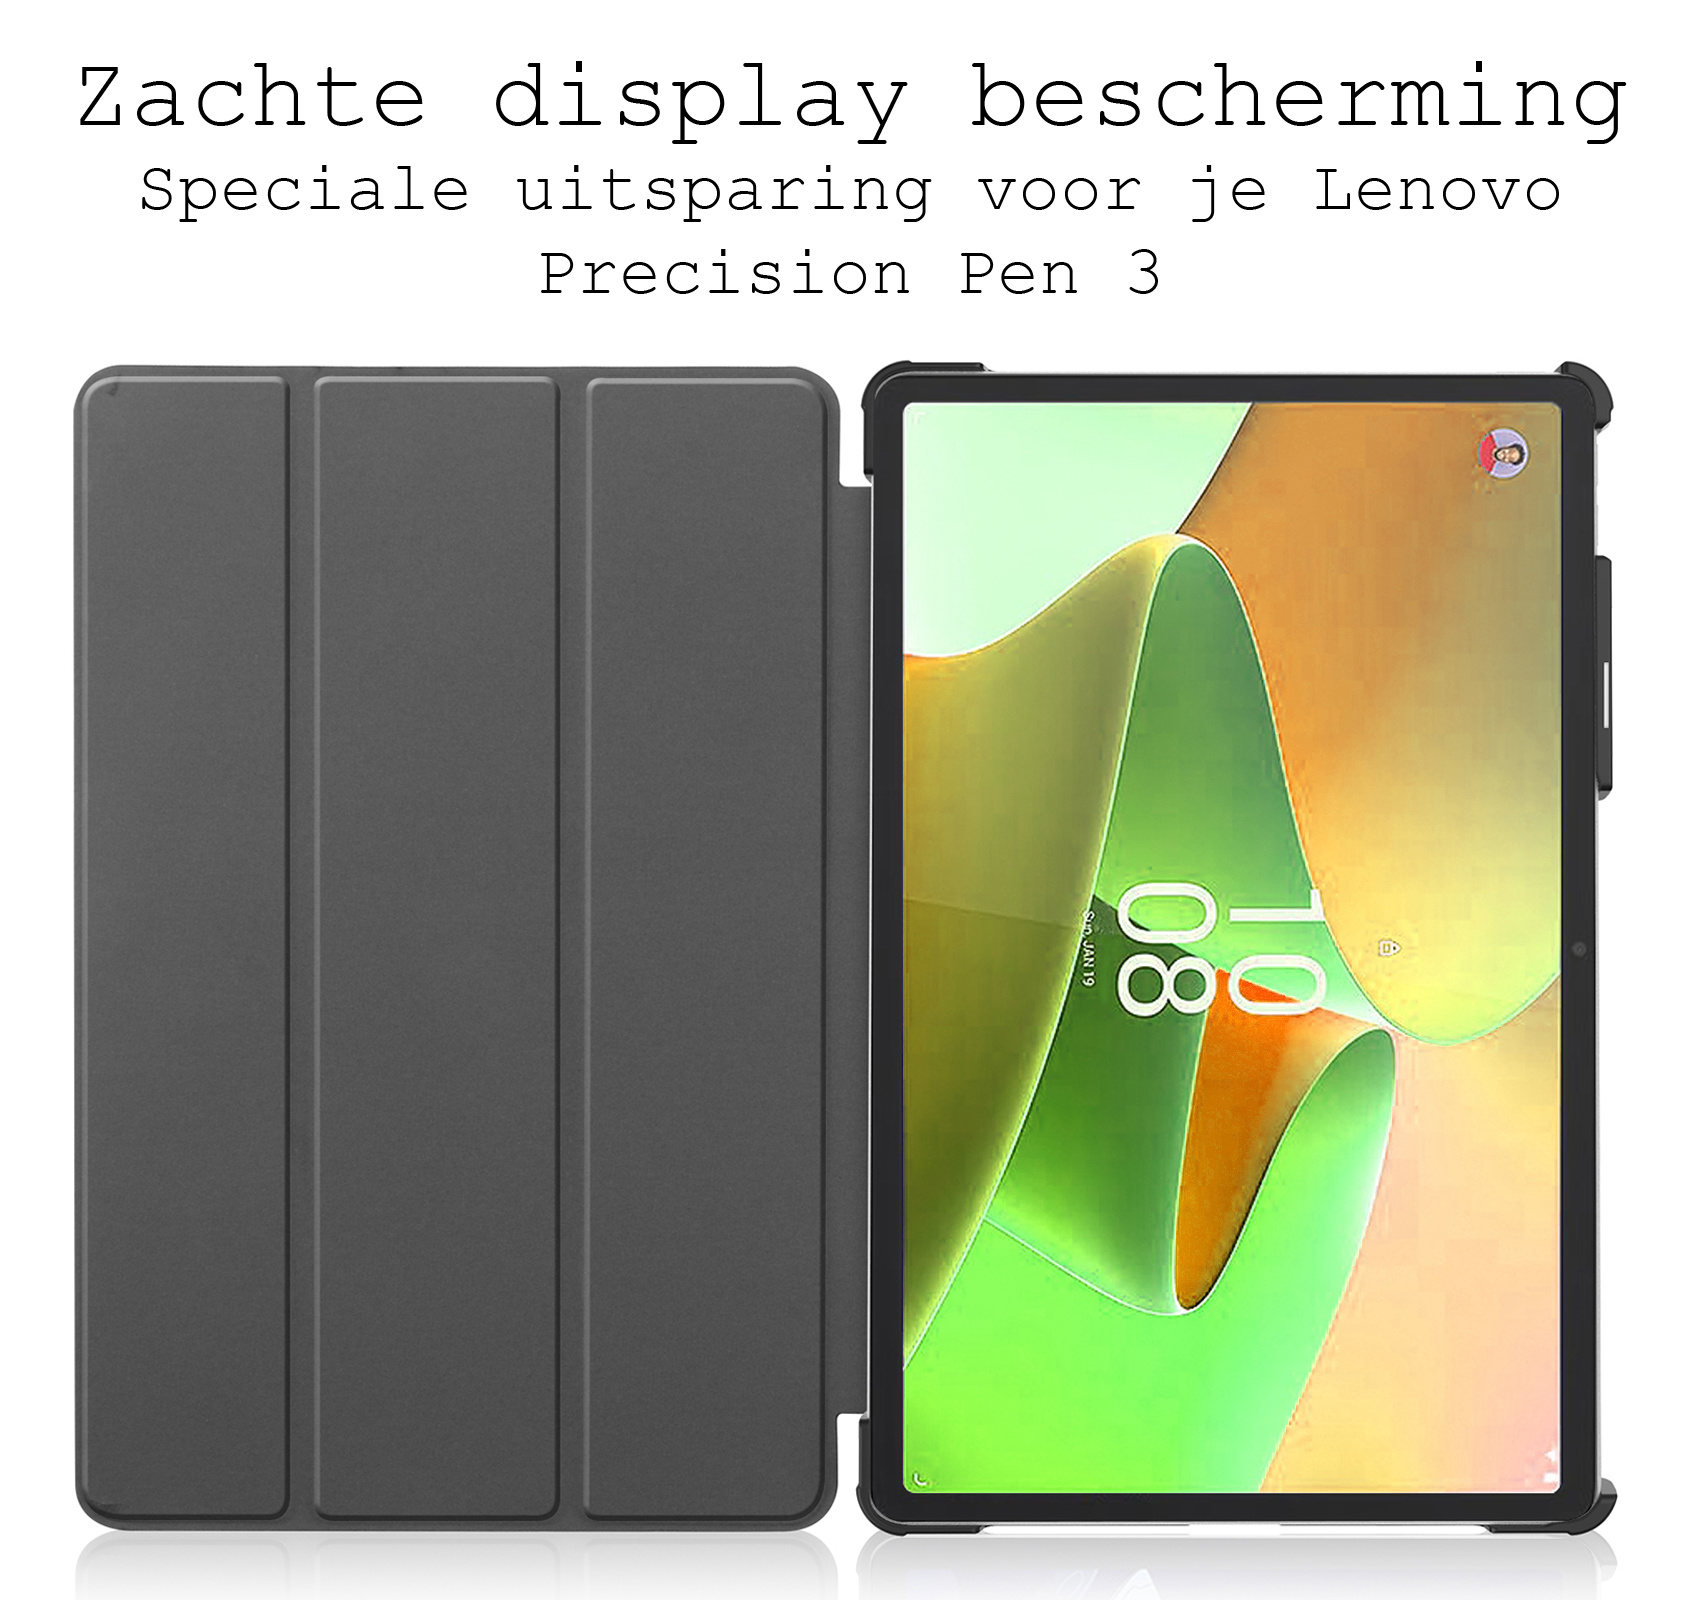 BASEY. Hoesje Geschikt voor Lenovo Tab P11 Pro Hoes Case Tablet Hoesje Tri-fold Met Uitsparing Geschikt voor Lenovo Pen - Hoes Geschikt voor Lenovo Tab P11 Pro Hoesje Hard Cover Bookcase Hoes - Don't Touch Me